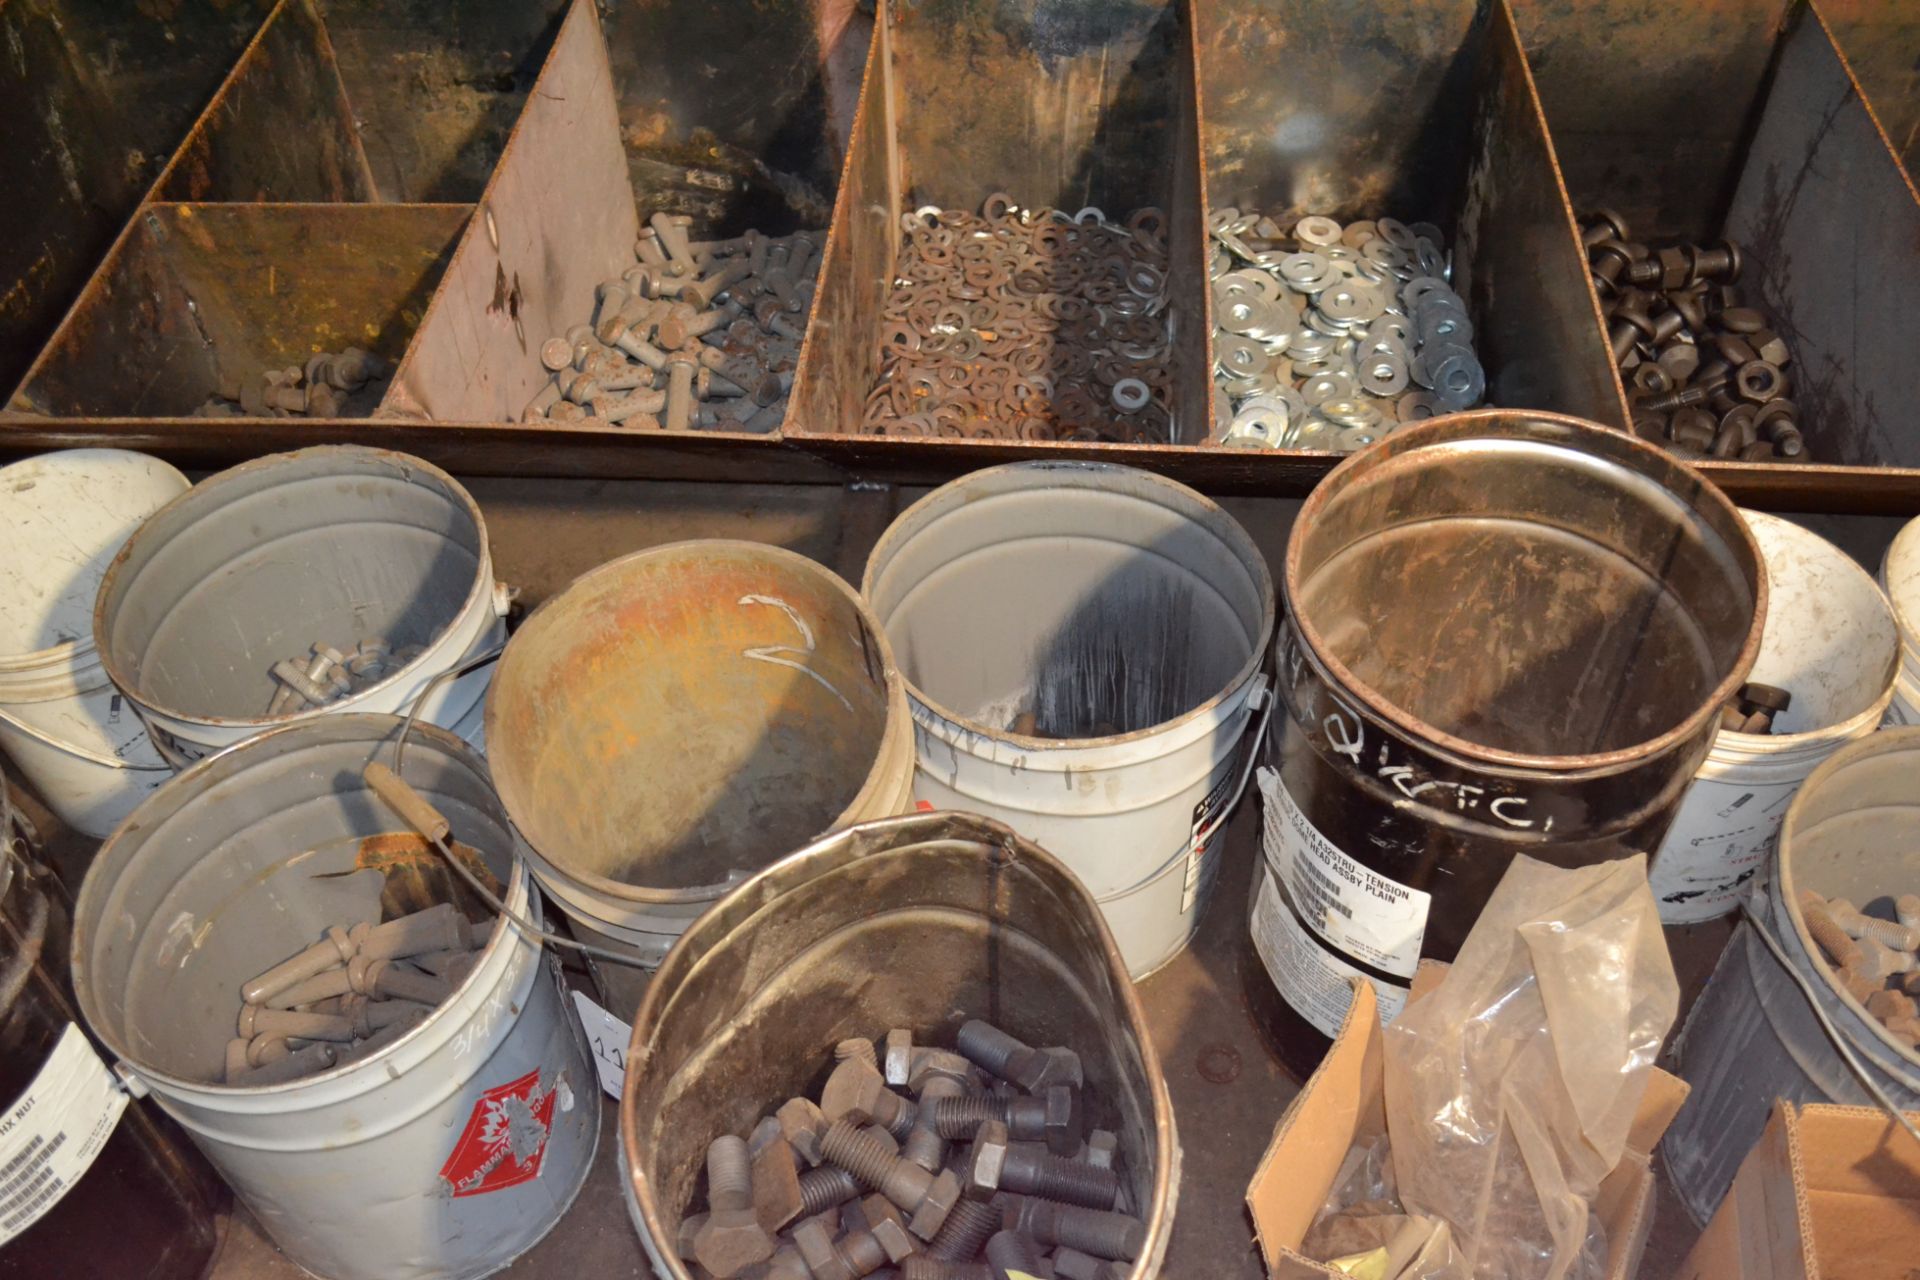 Lot Consisting of Parts Bins With Misc. Hardware Including Bolts, Nots, Washers, Pins, Etc. - Image 11 of 12